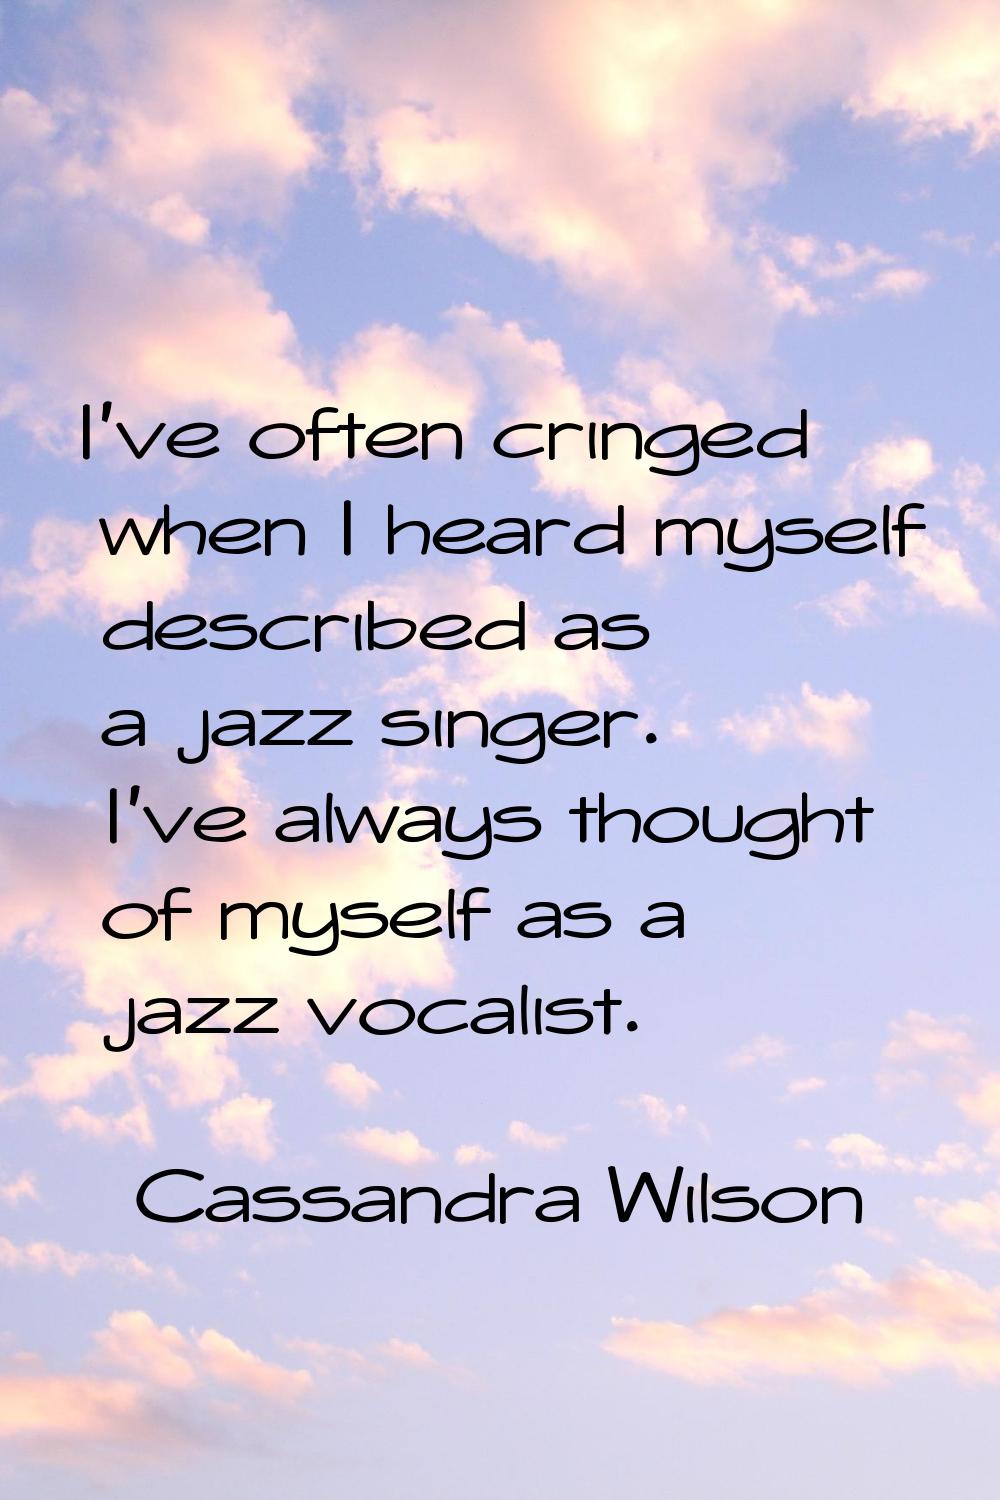 I've often cringed when I heard myself described as a jazz singer. I've always thought of myself as